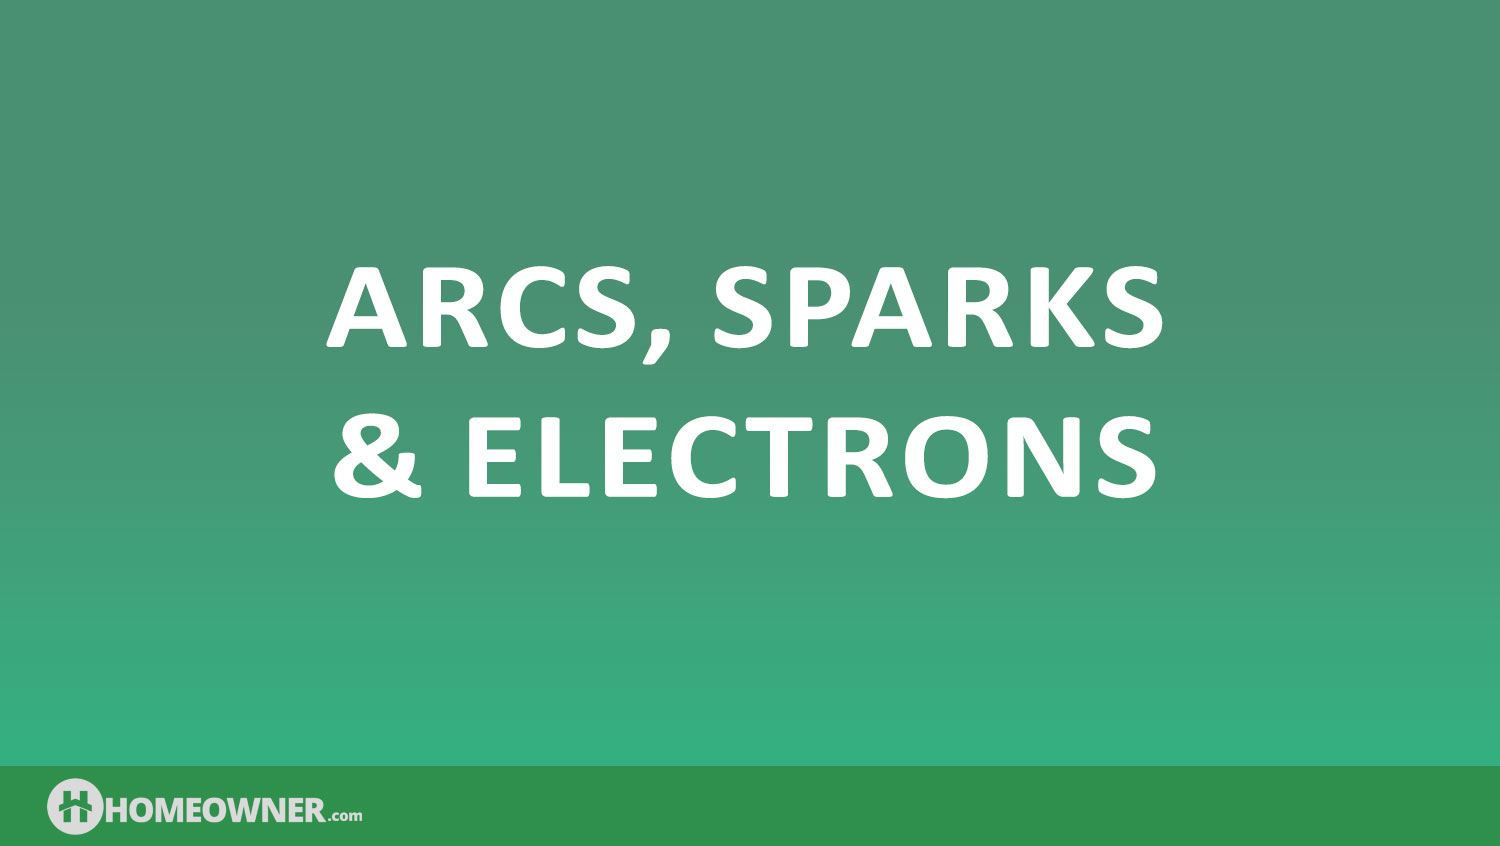 Arcs, Sparks, & Electrons: Accelerating Into The Future